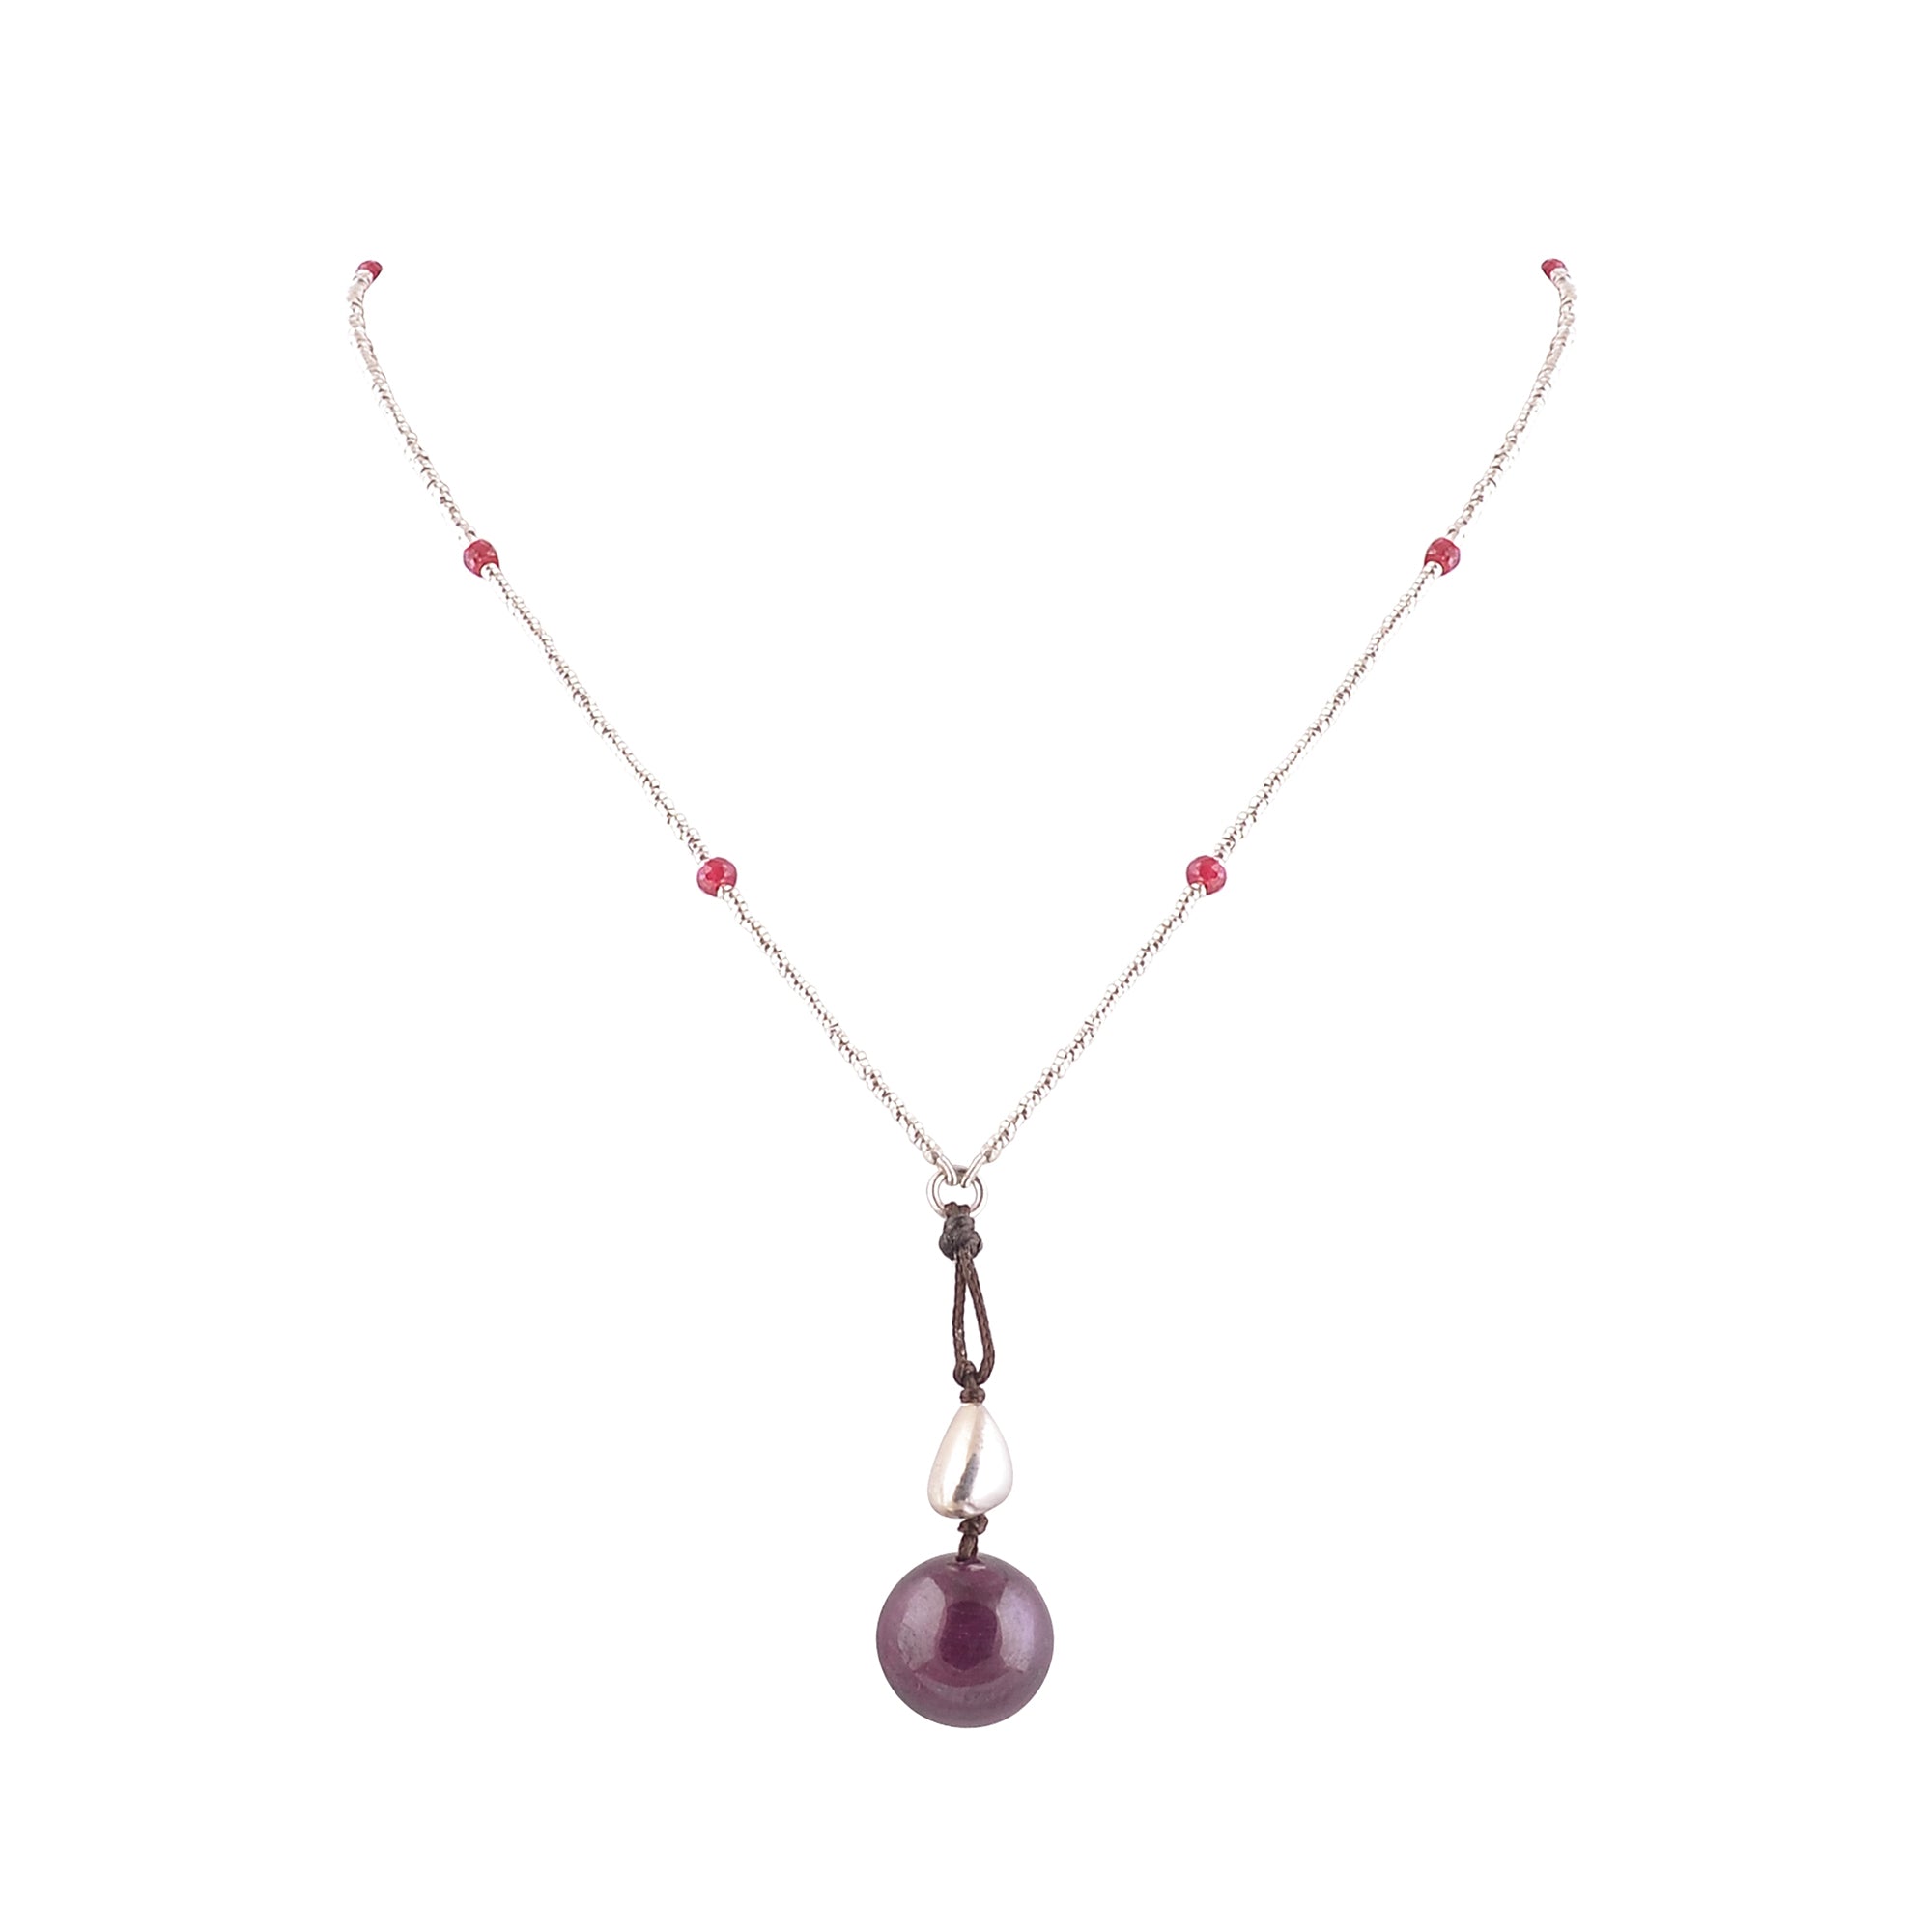 Buy Handmade Silver Ruby Pendant Washer Bead Long Necklace